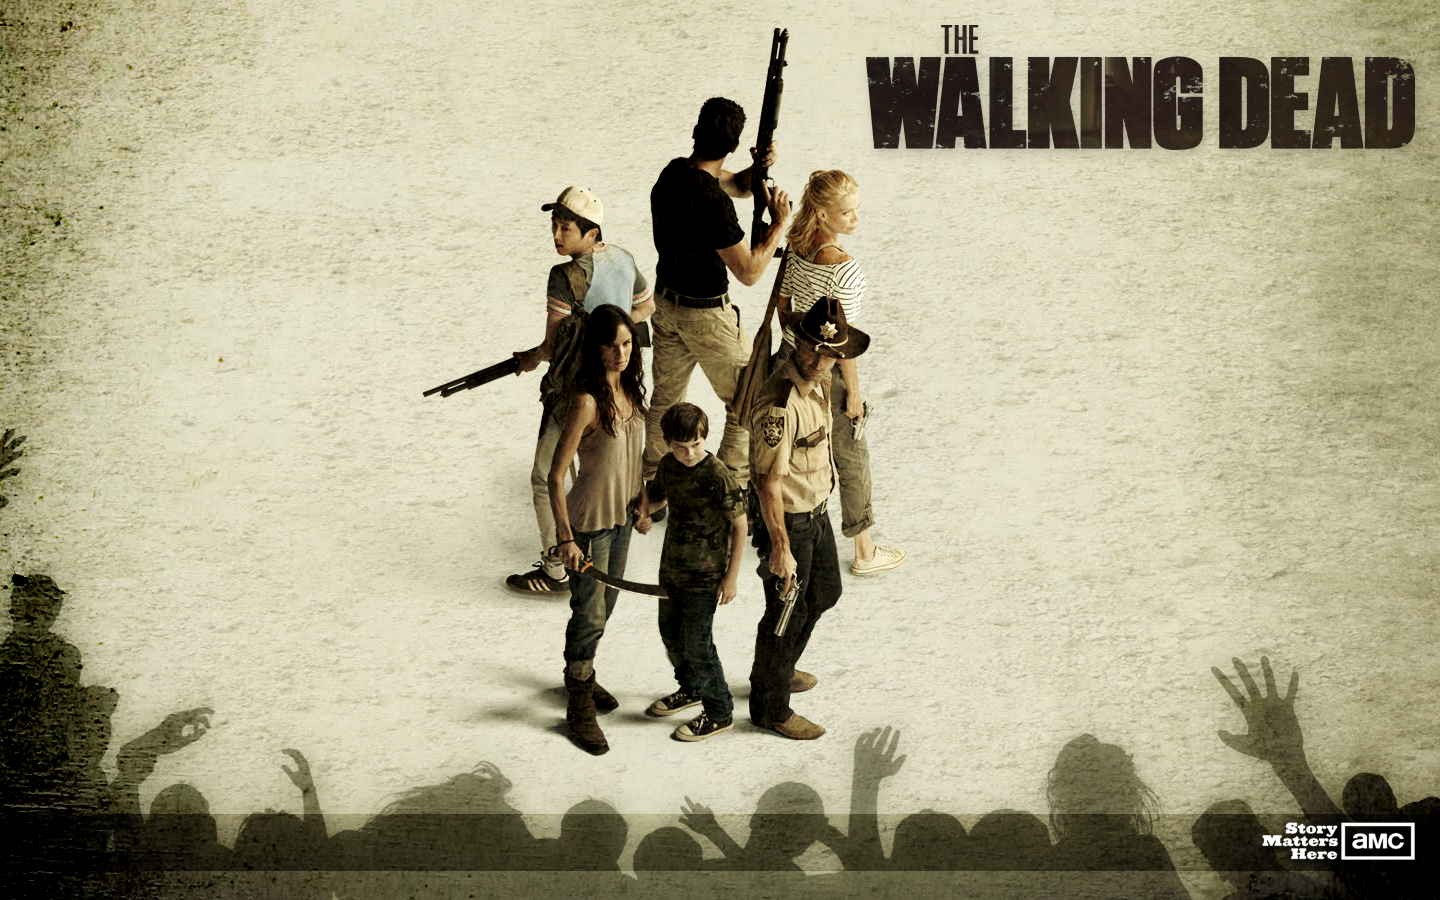 The Walking Dead is a television drama series developed by Frank 1440x900